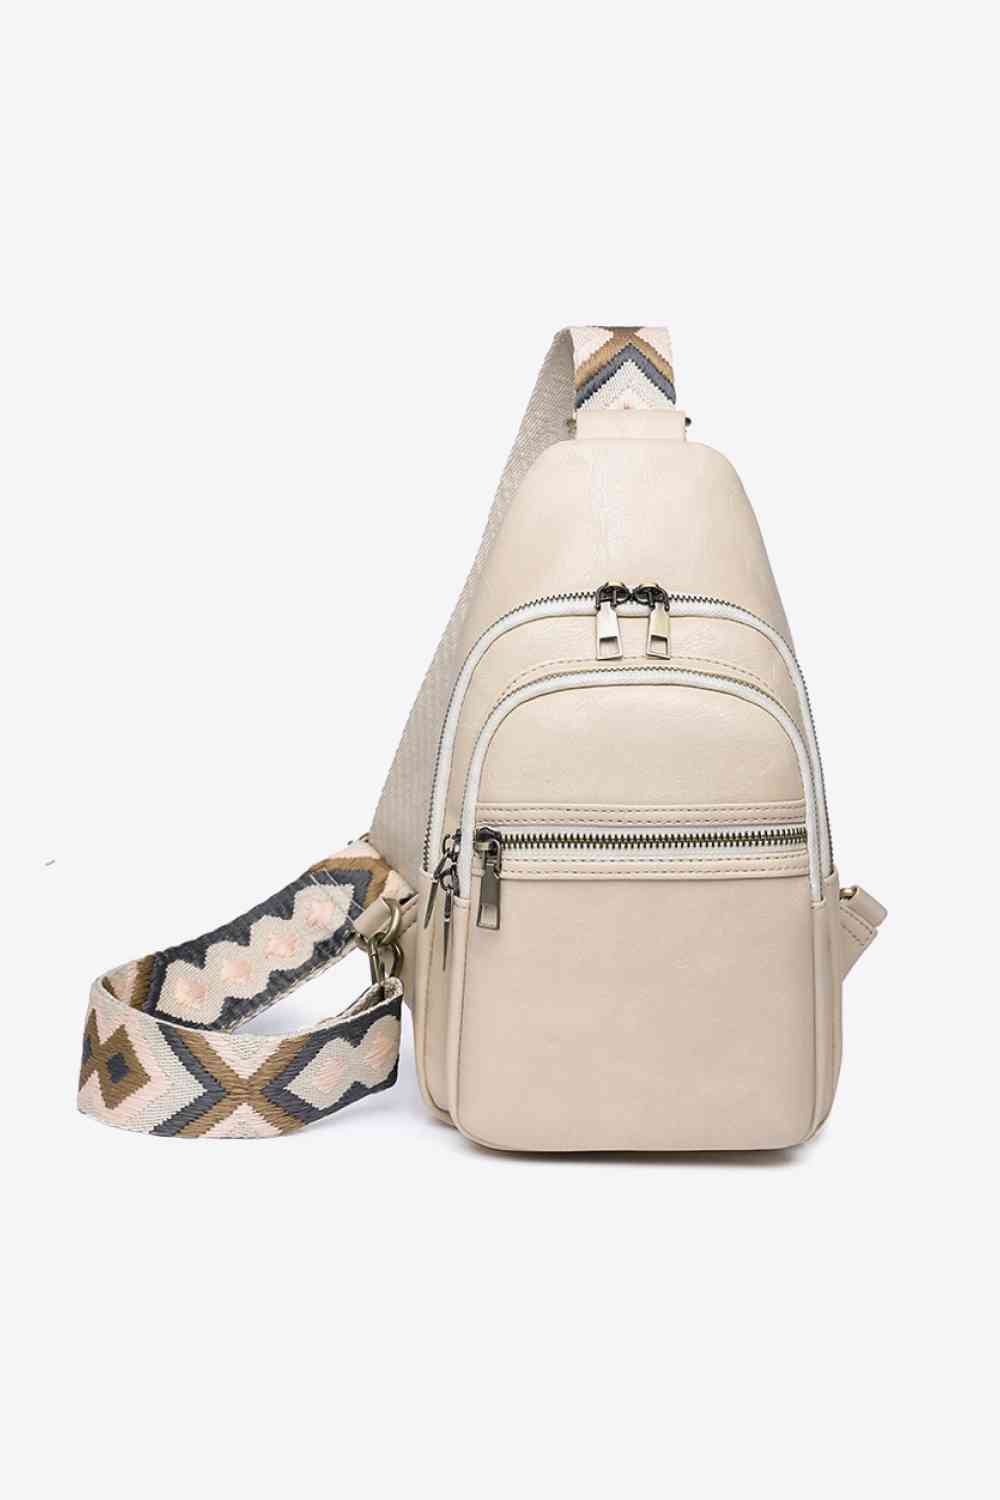 Adored It's Your Time PU Leather Sling Bag Cream One Size